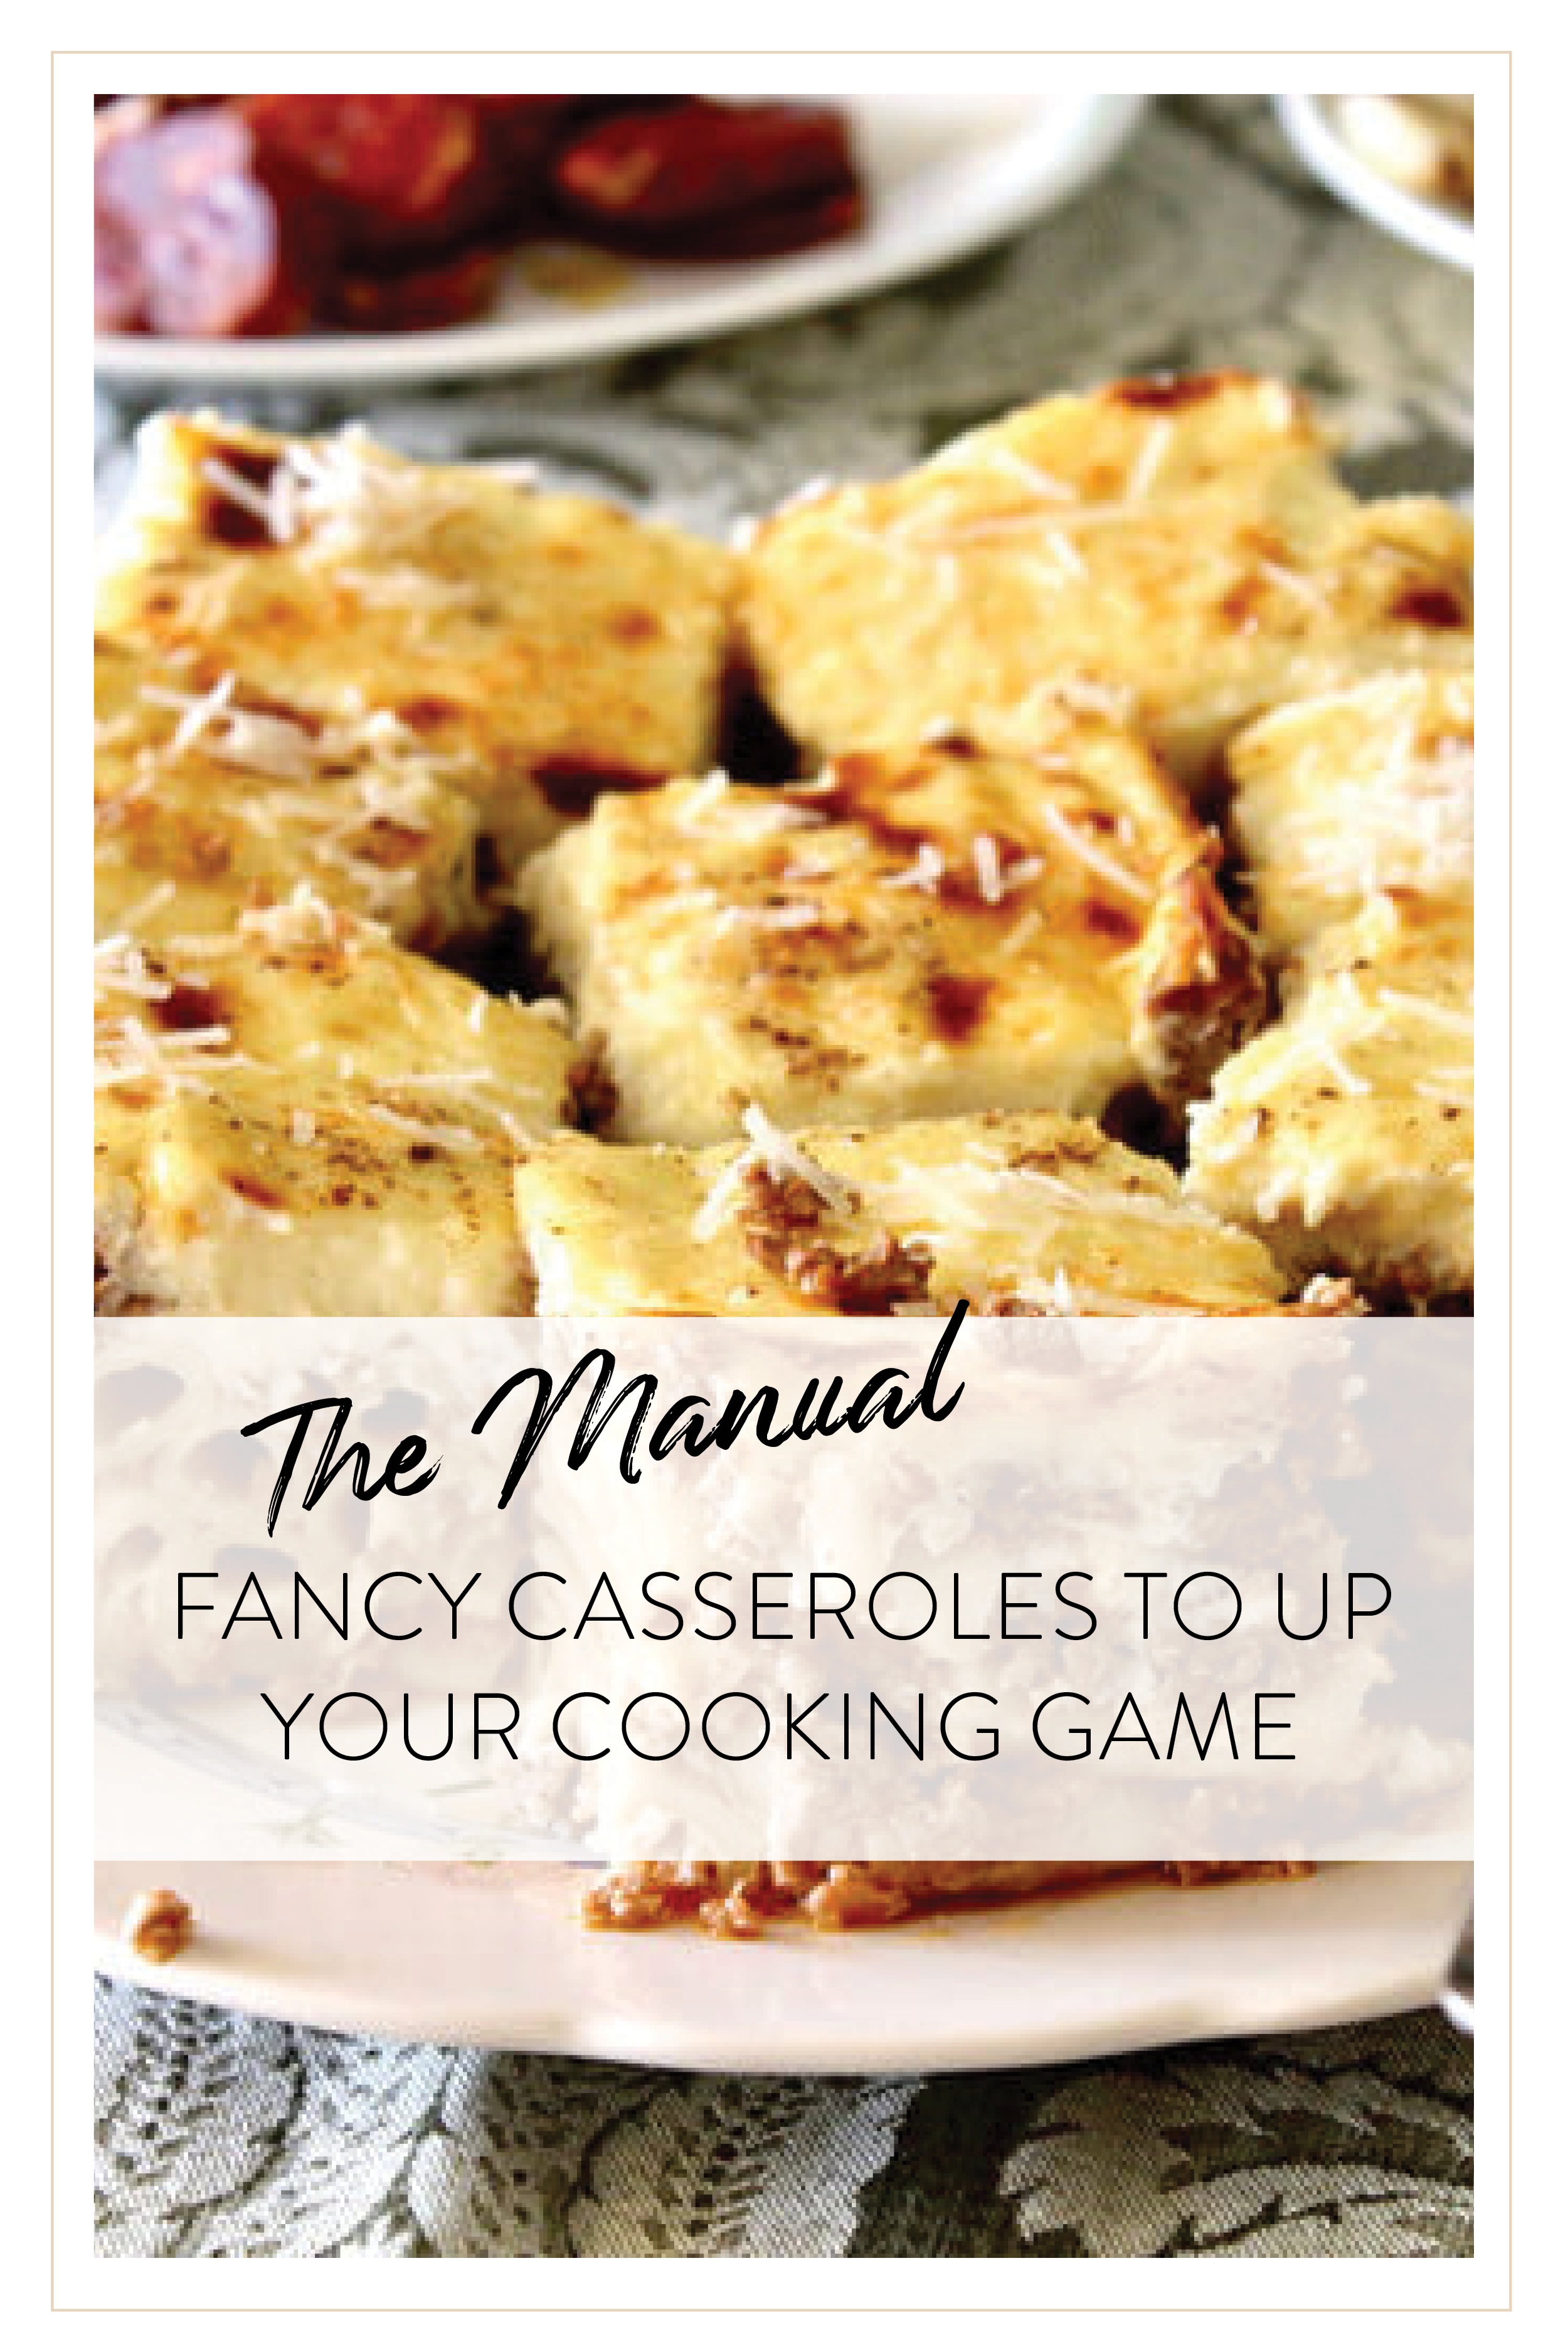 The Manual Fancy Casseroles to Up Your Cooking Game